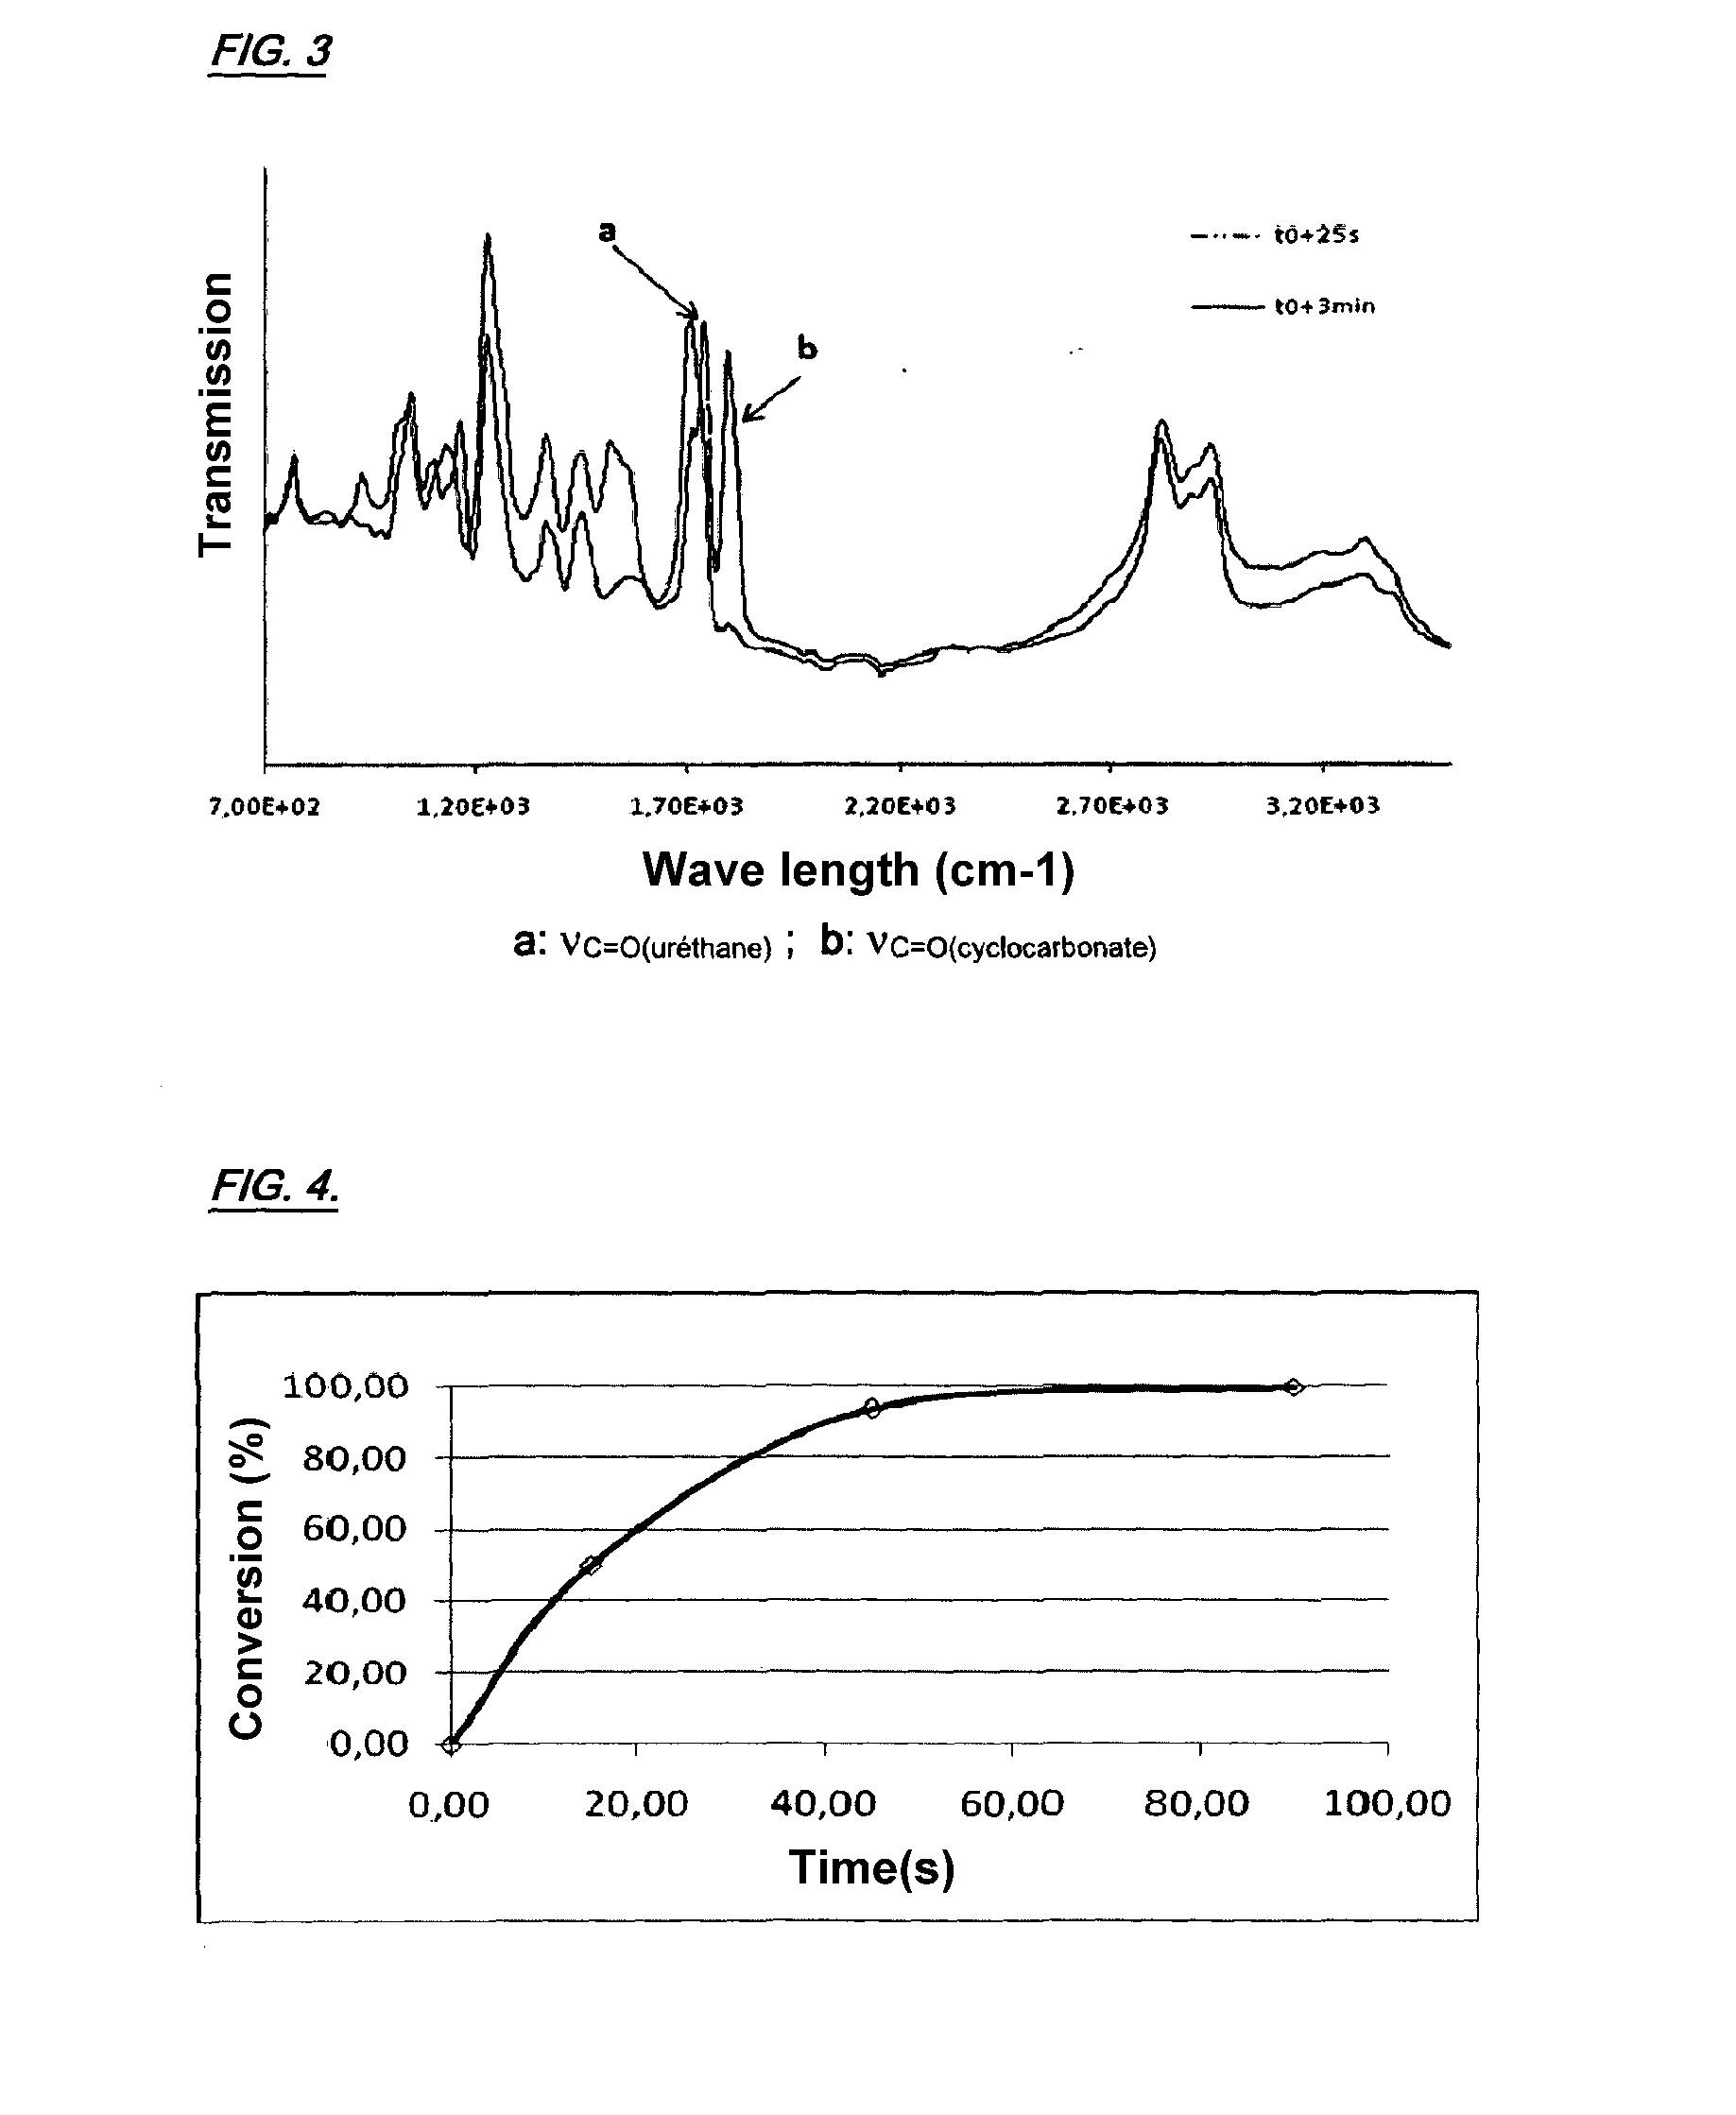 Method for preparing a compound comprising at least one beta-hydroxy-urethane unit and/or at least one upsilon-hydroxy-urethane unit